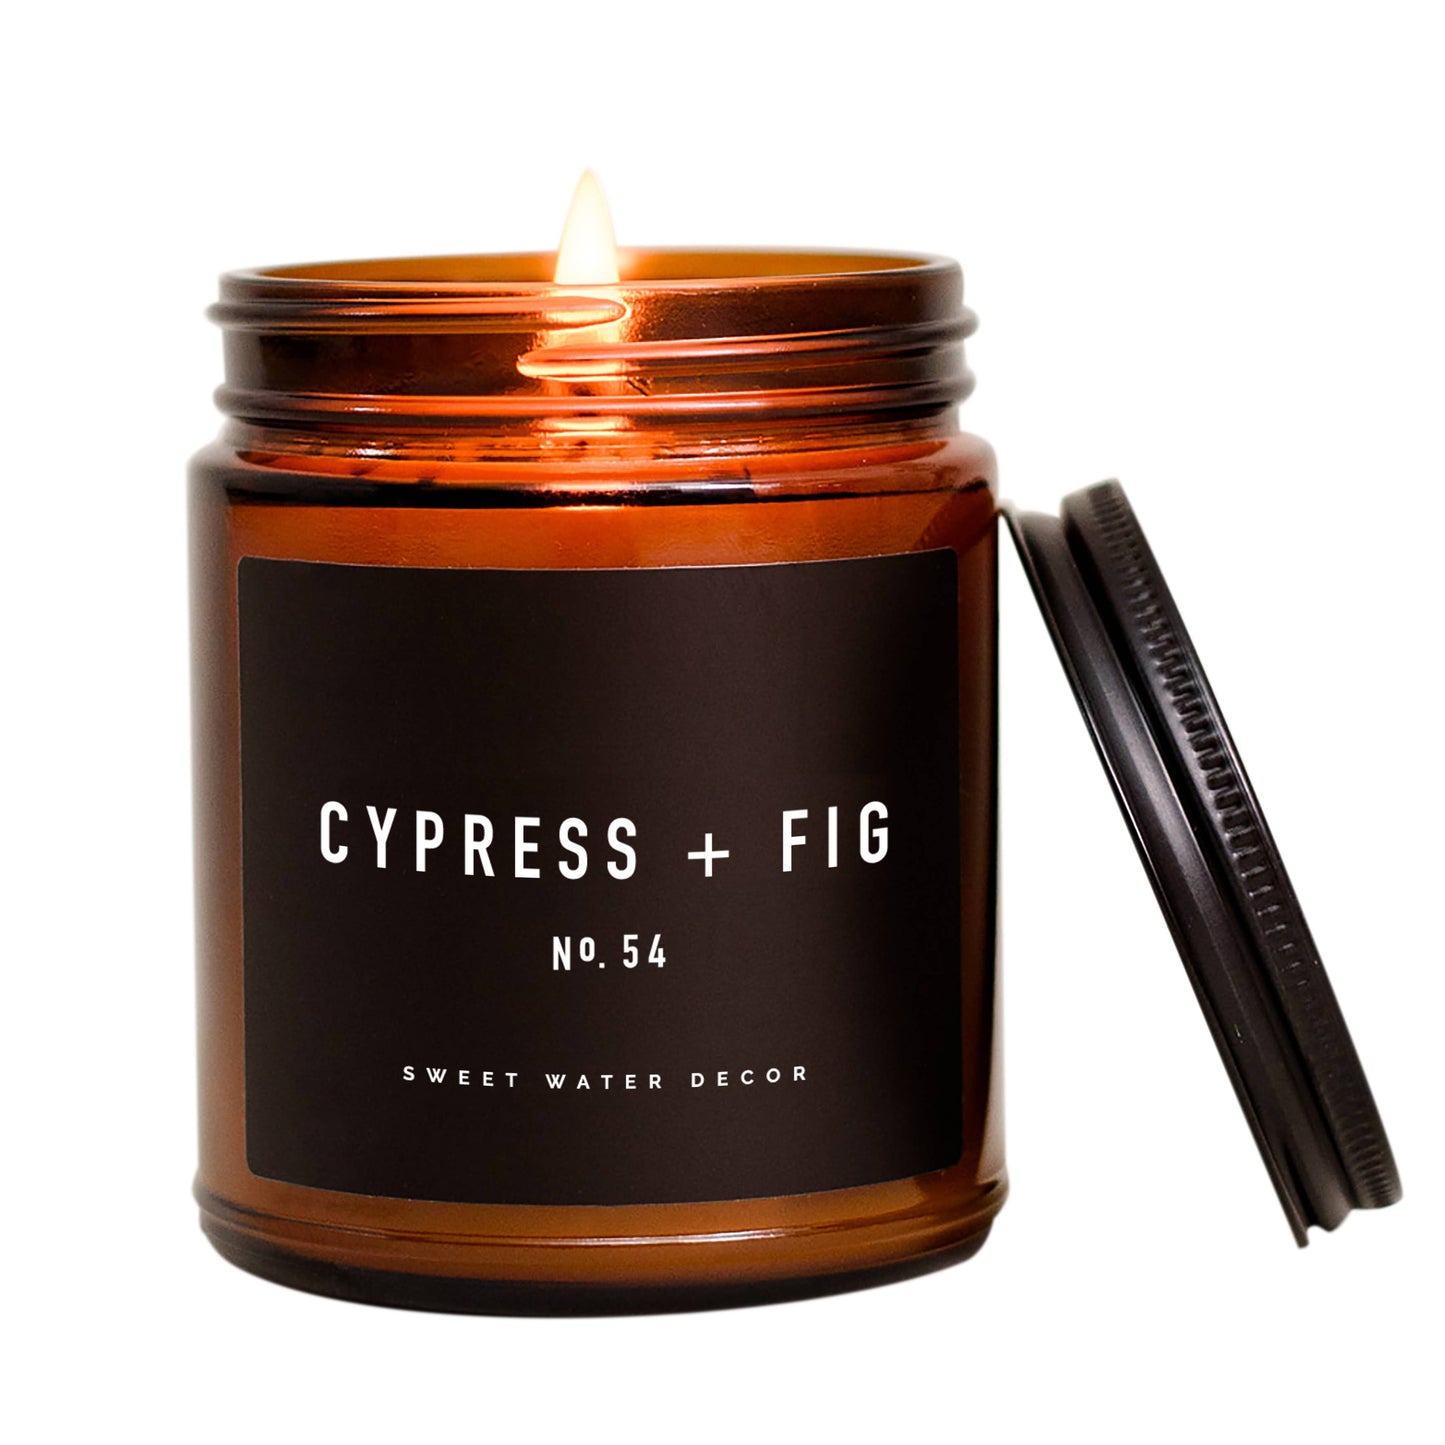 Cypress and Fig Soy Candle - Amber Jar - 9 oz